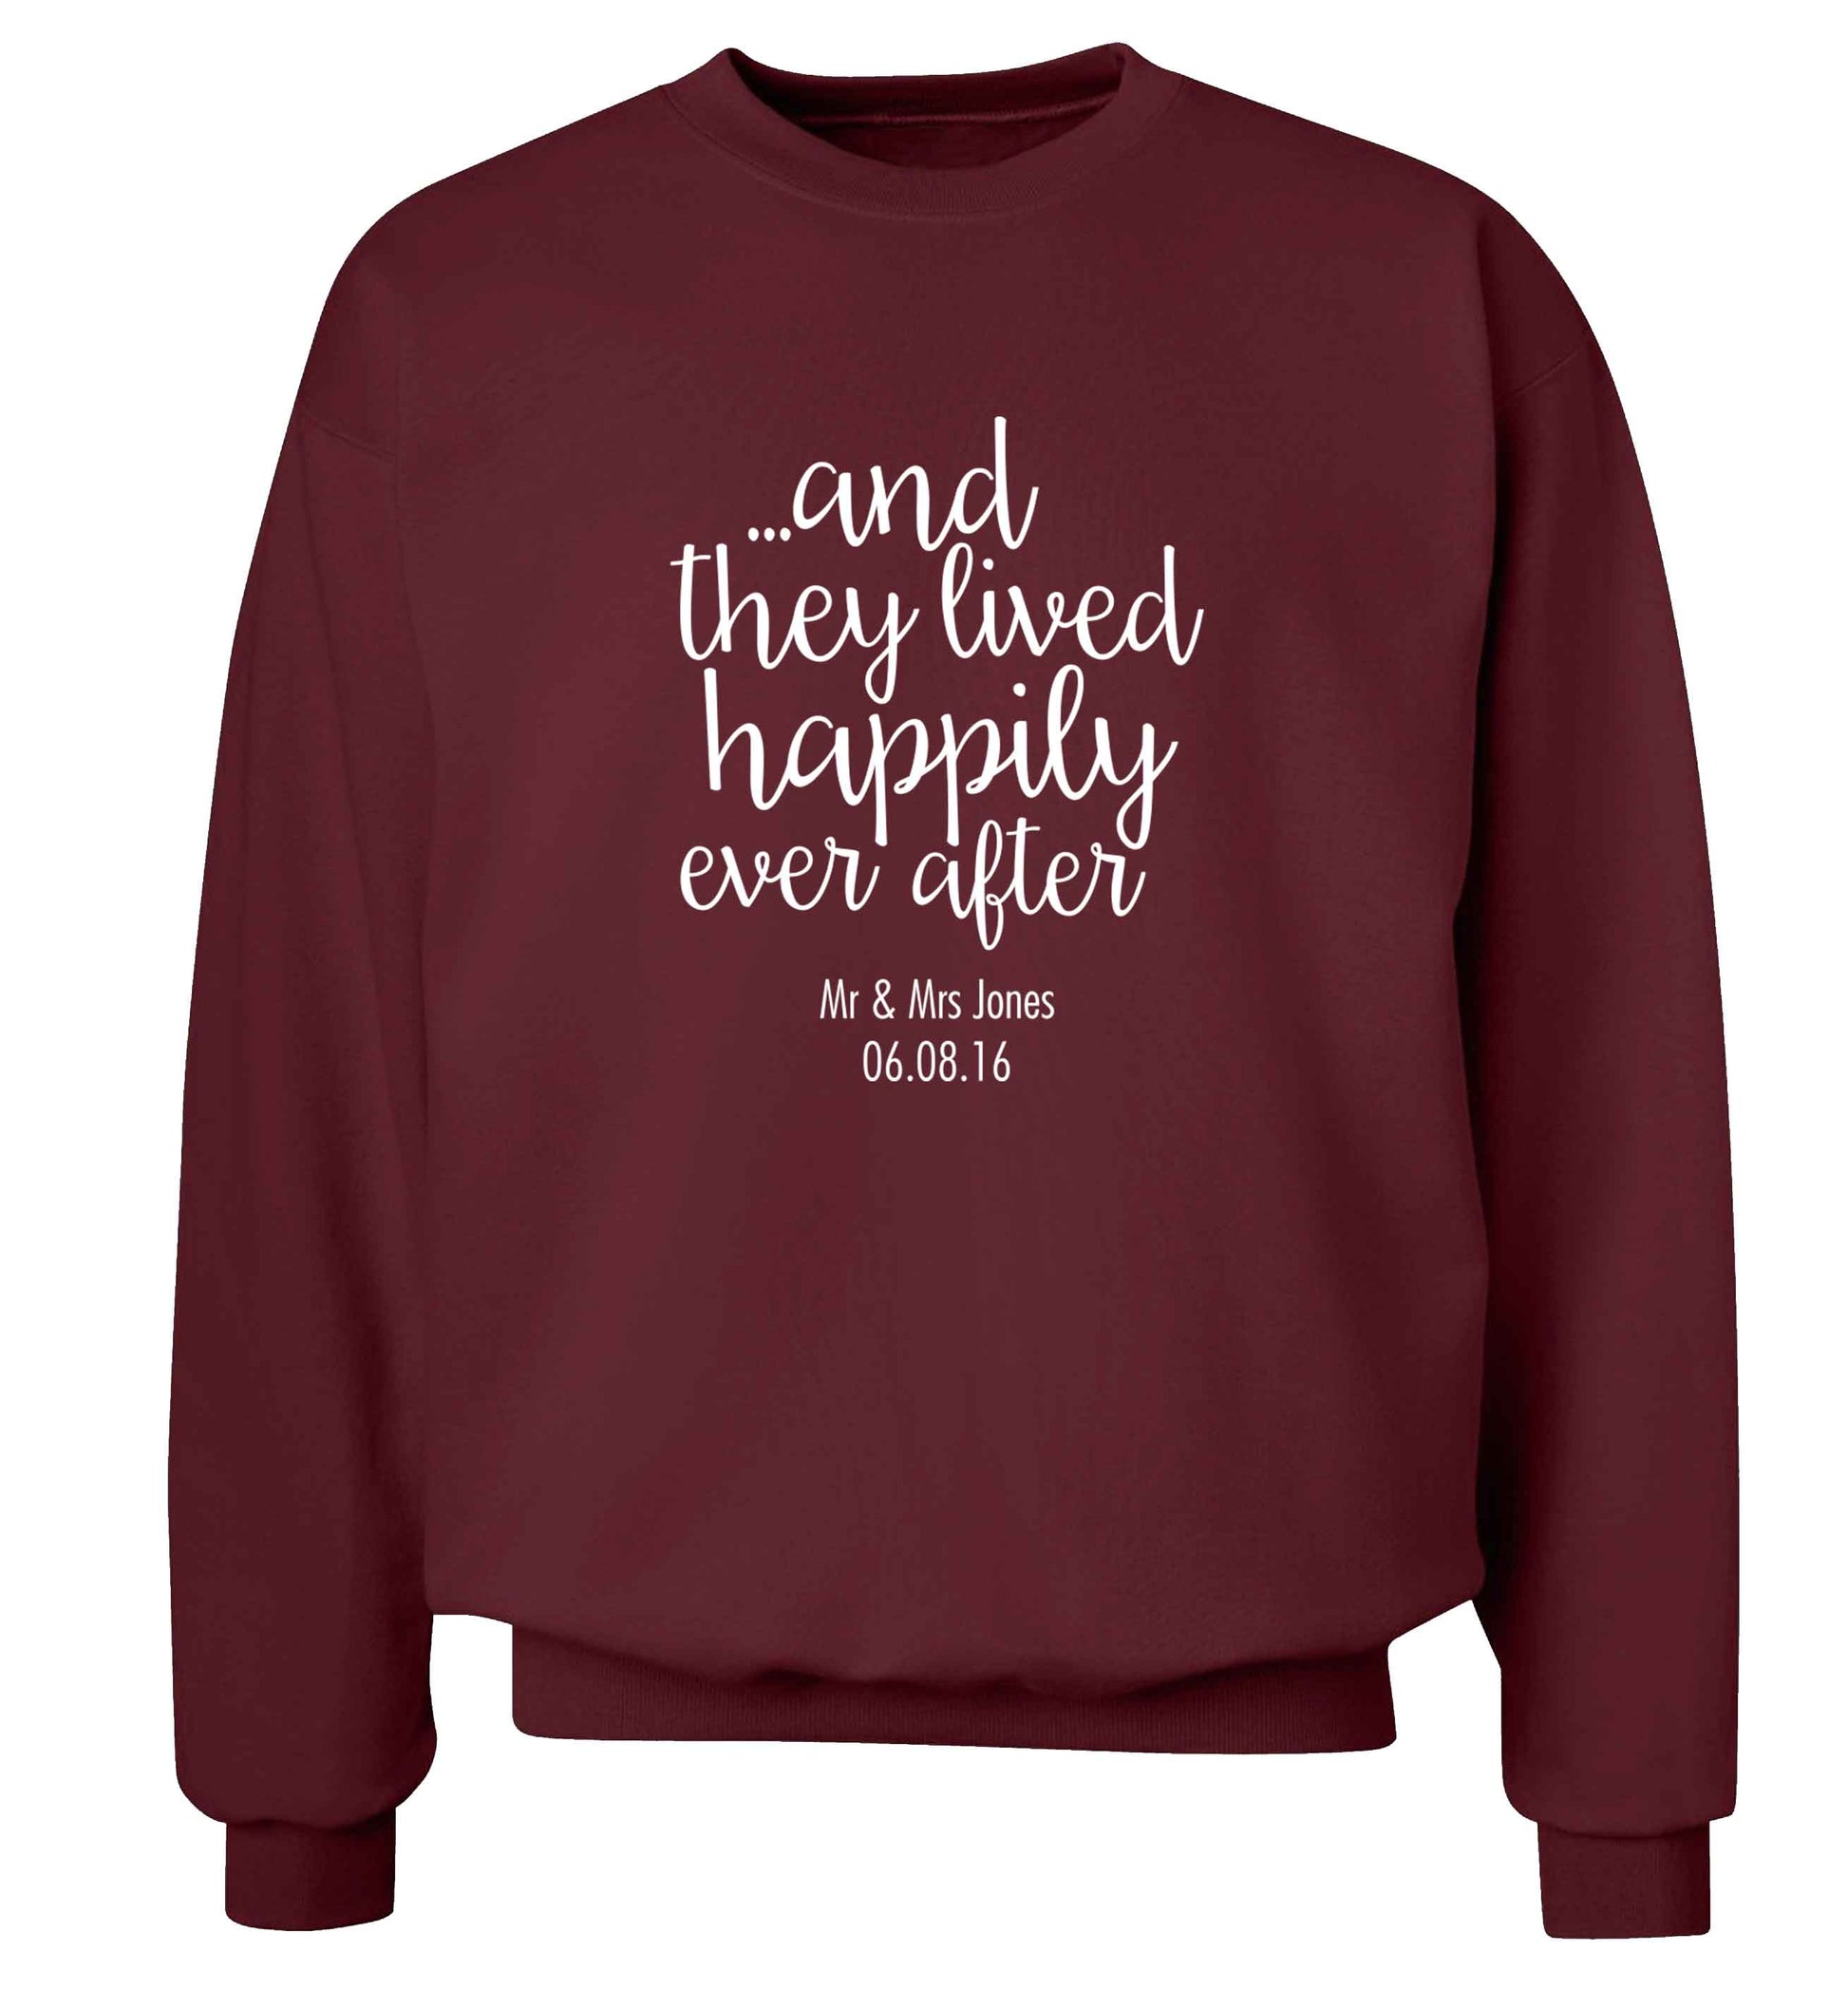 ...and they lived happily ever after - personalised date and names adult's unisex maroon sweater 2XL